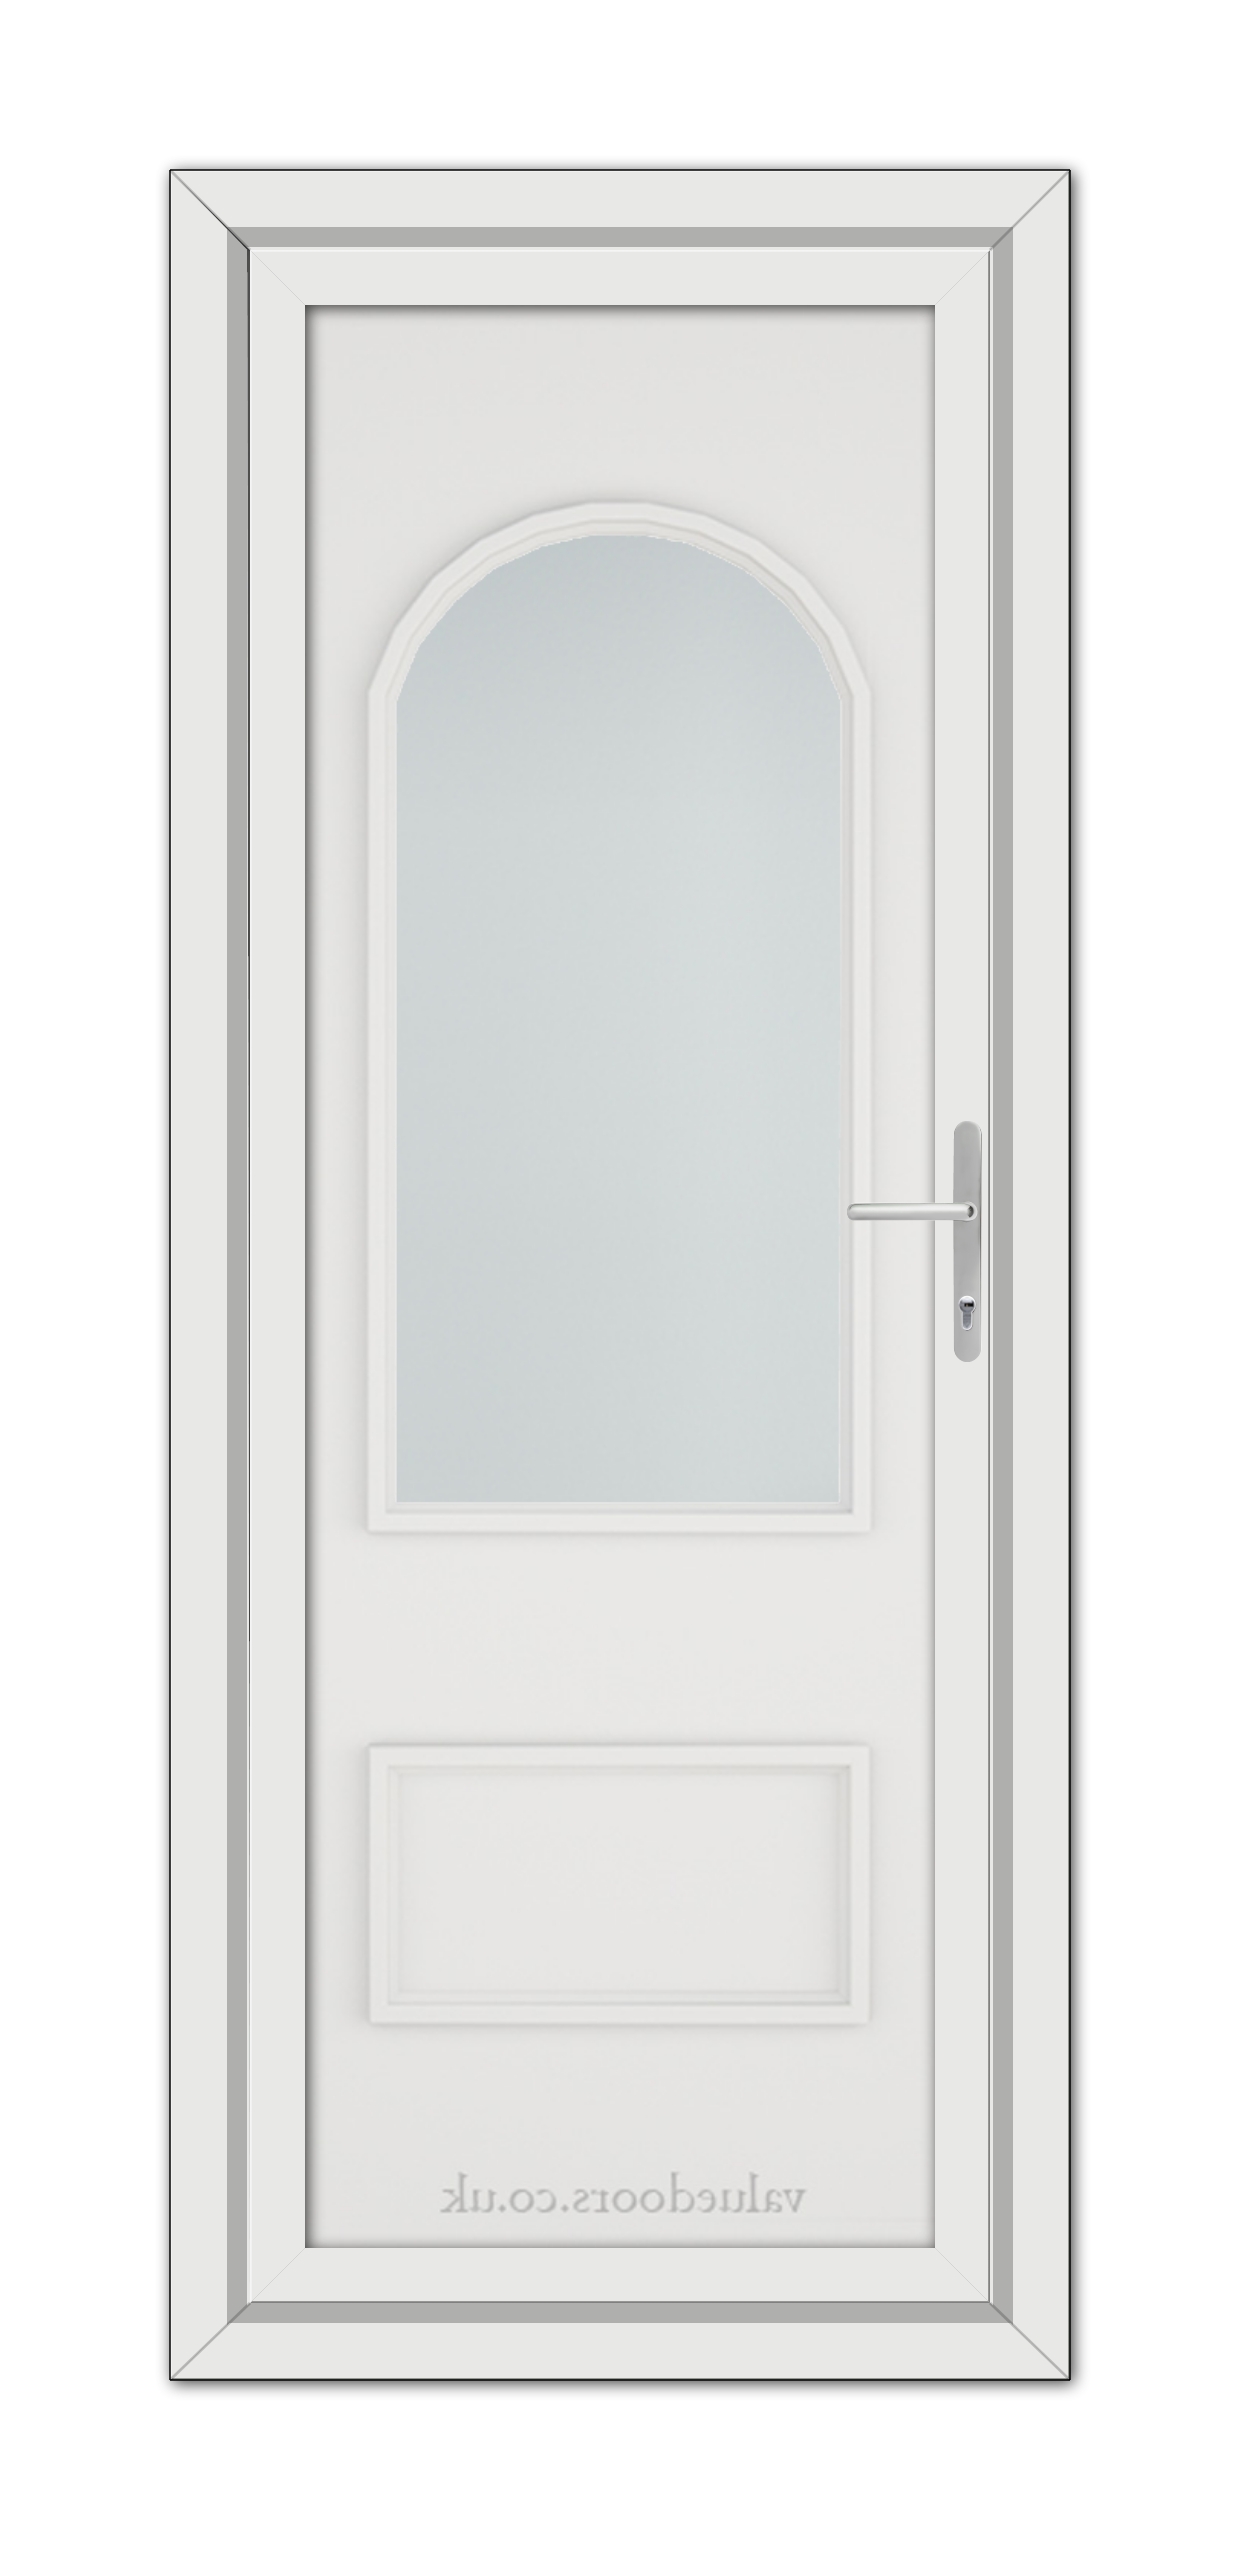 A vertical image of a White Rockingham uPVC Door with a large arched window at the top and a silver handle on the right side, set against a white background.